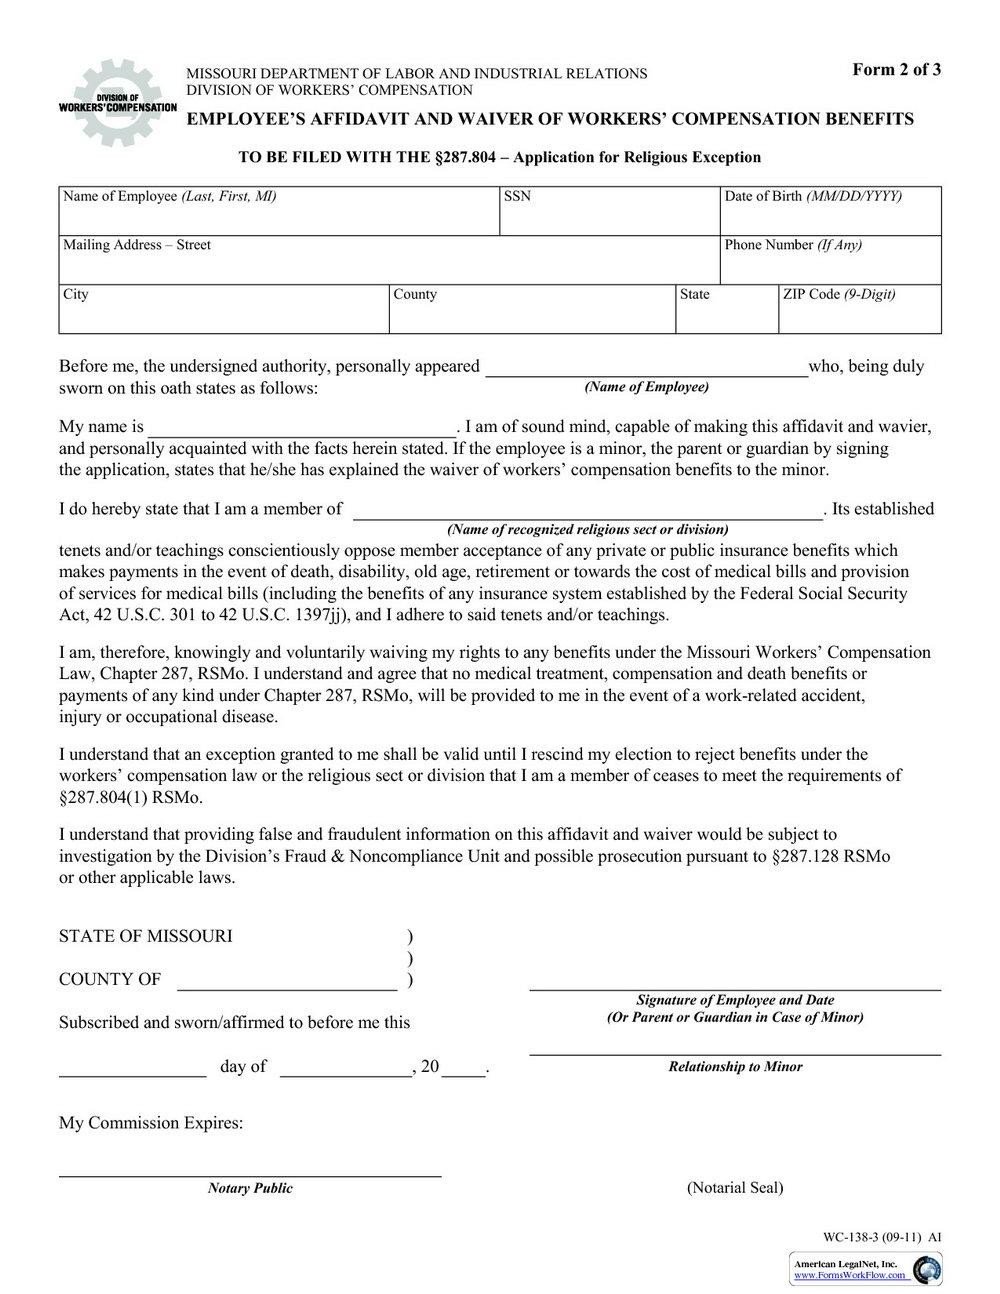 Workers pensation Waiver Form New York